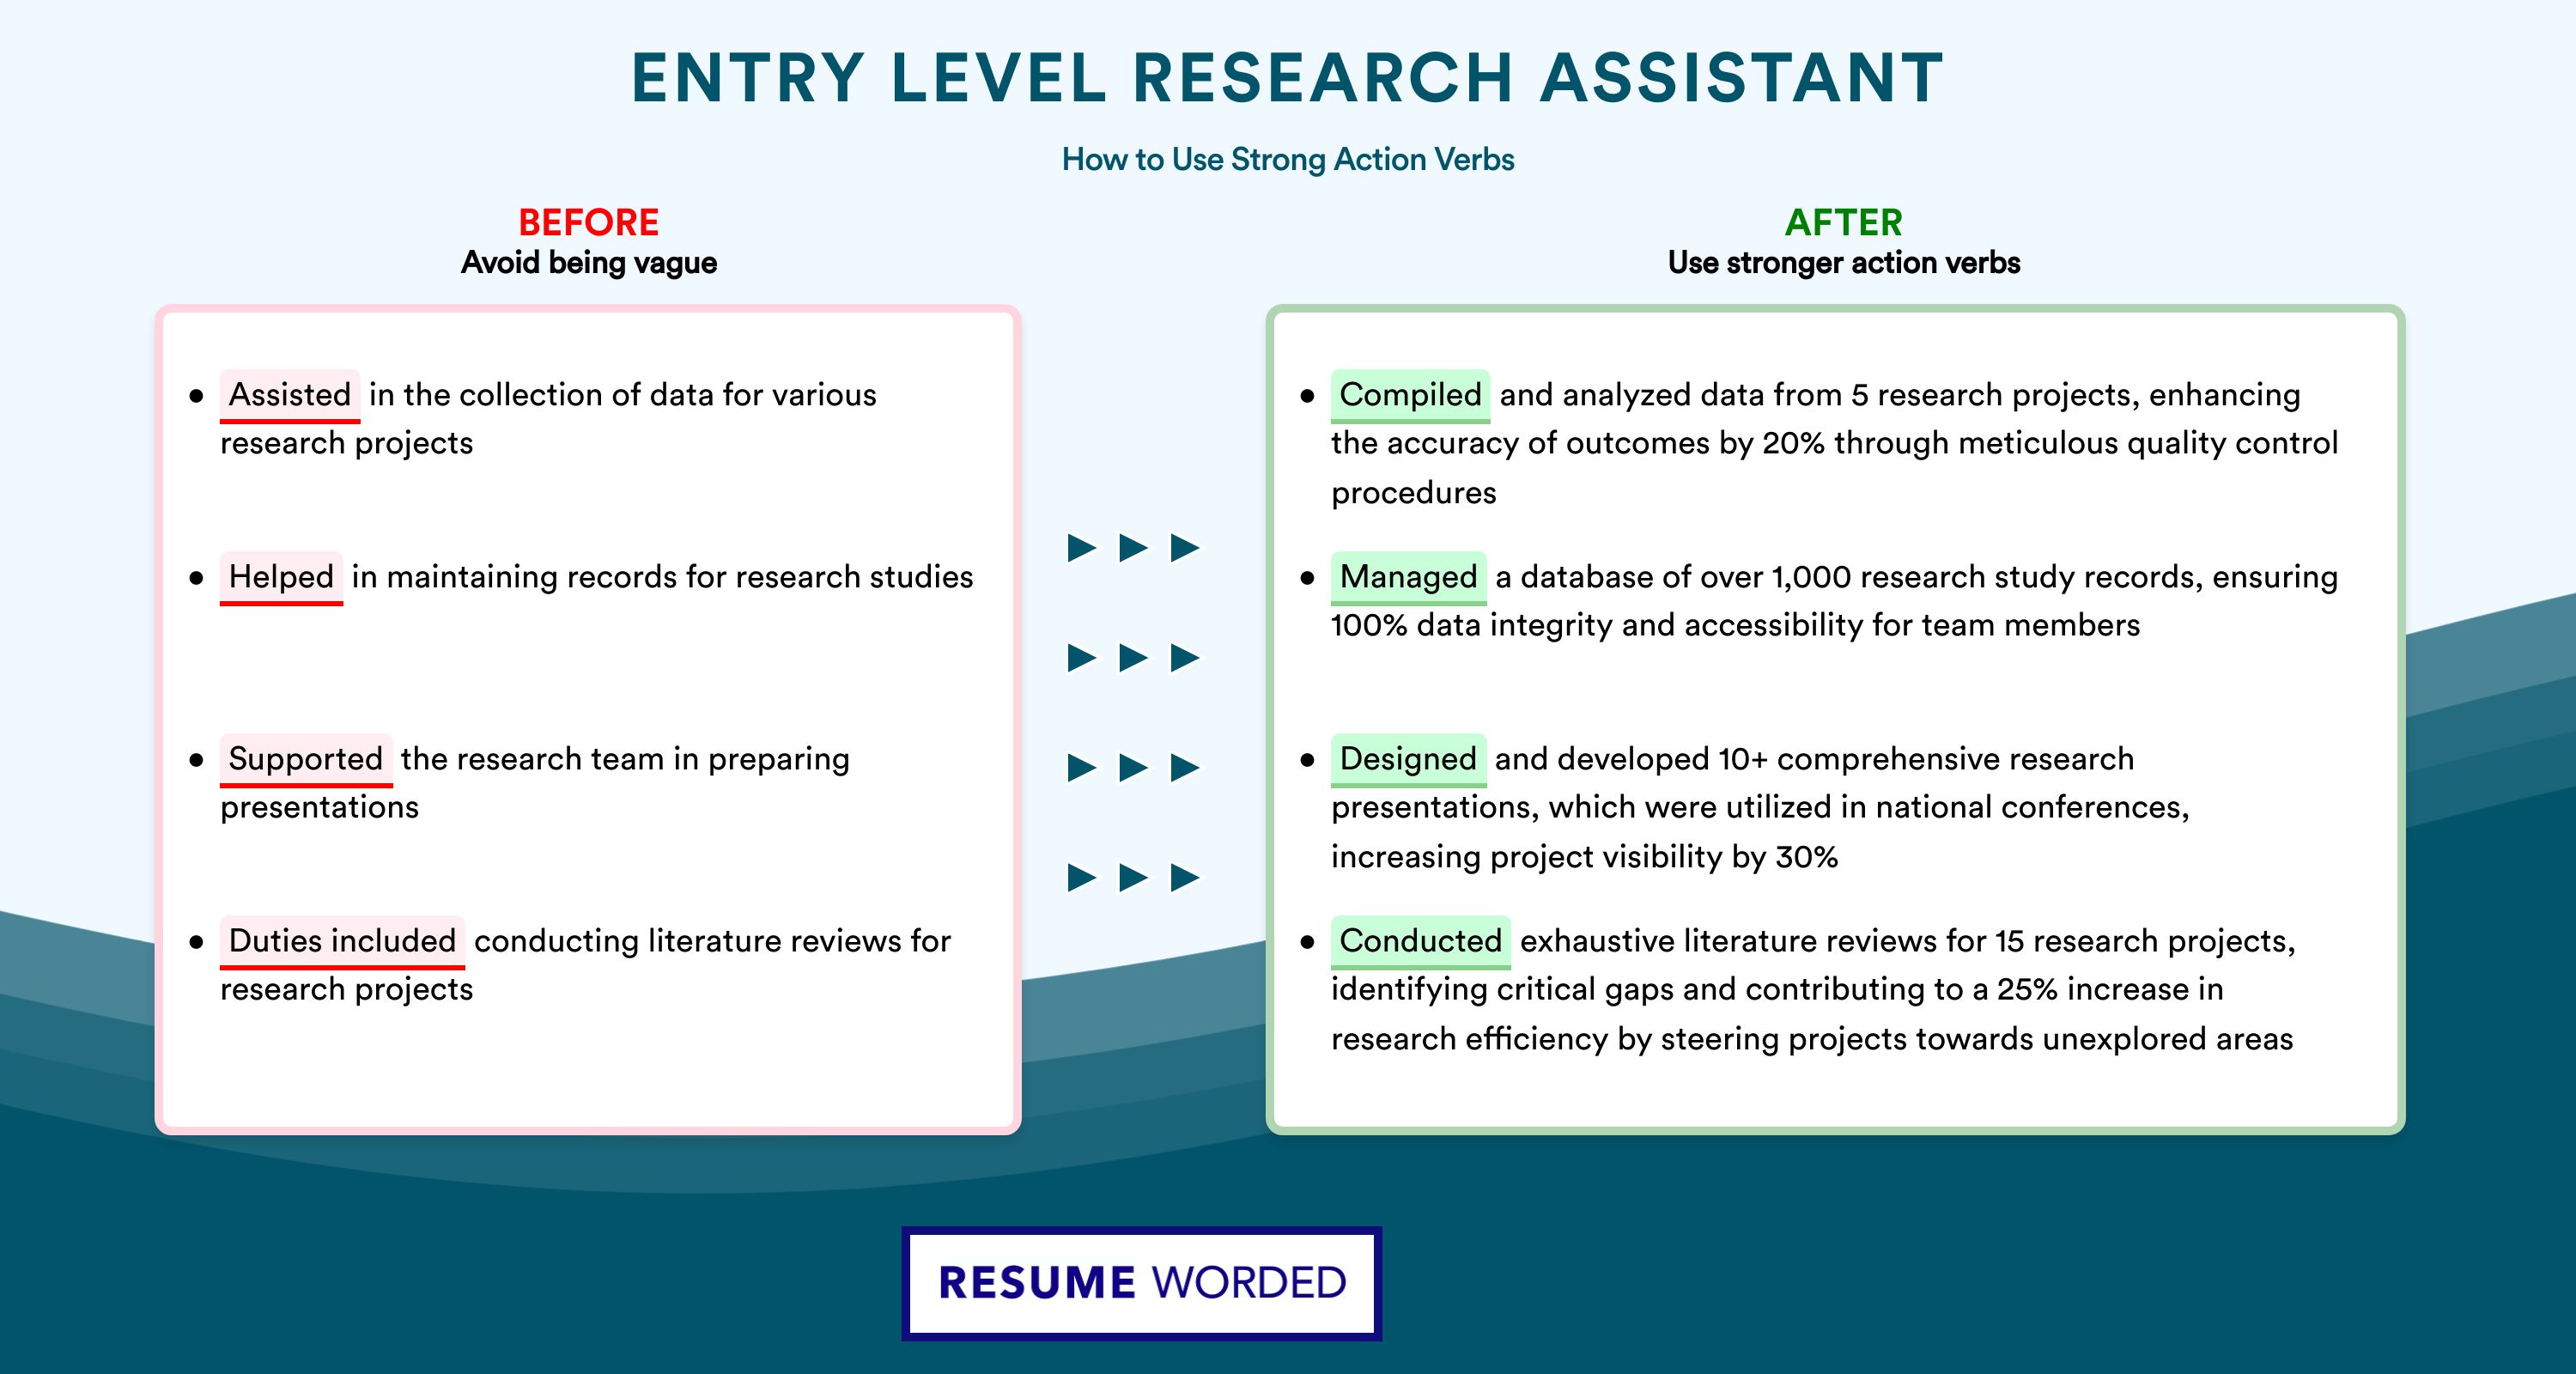 Action Verbs for Entry Level Research Assistant